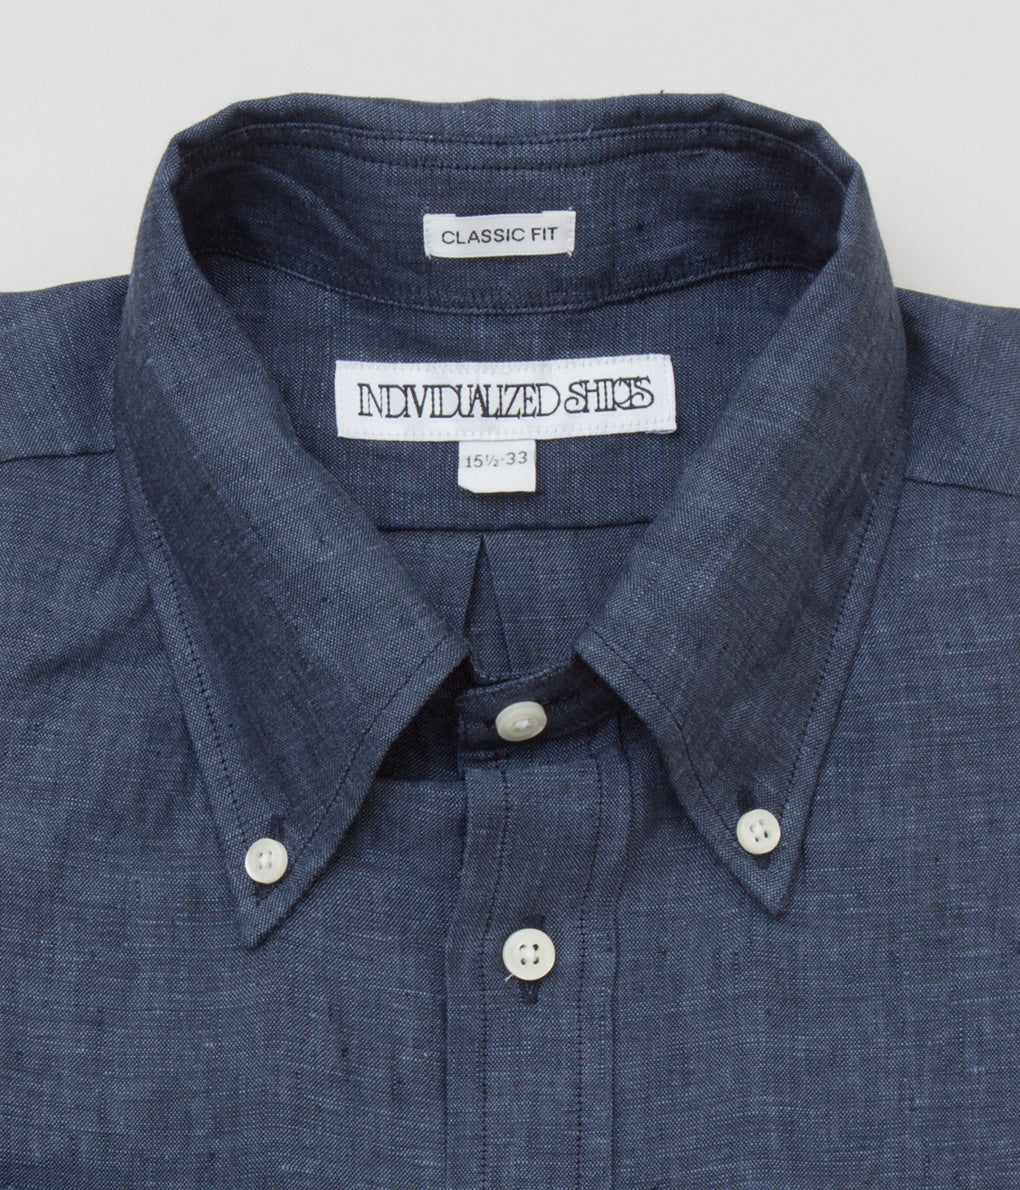 INDIVIDUALIZED SHIRTS "LINEN (CLASSIC FIT BUTTON DOWN SHIRT)" (NAVY)